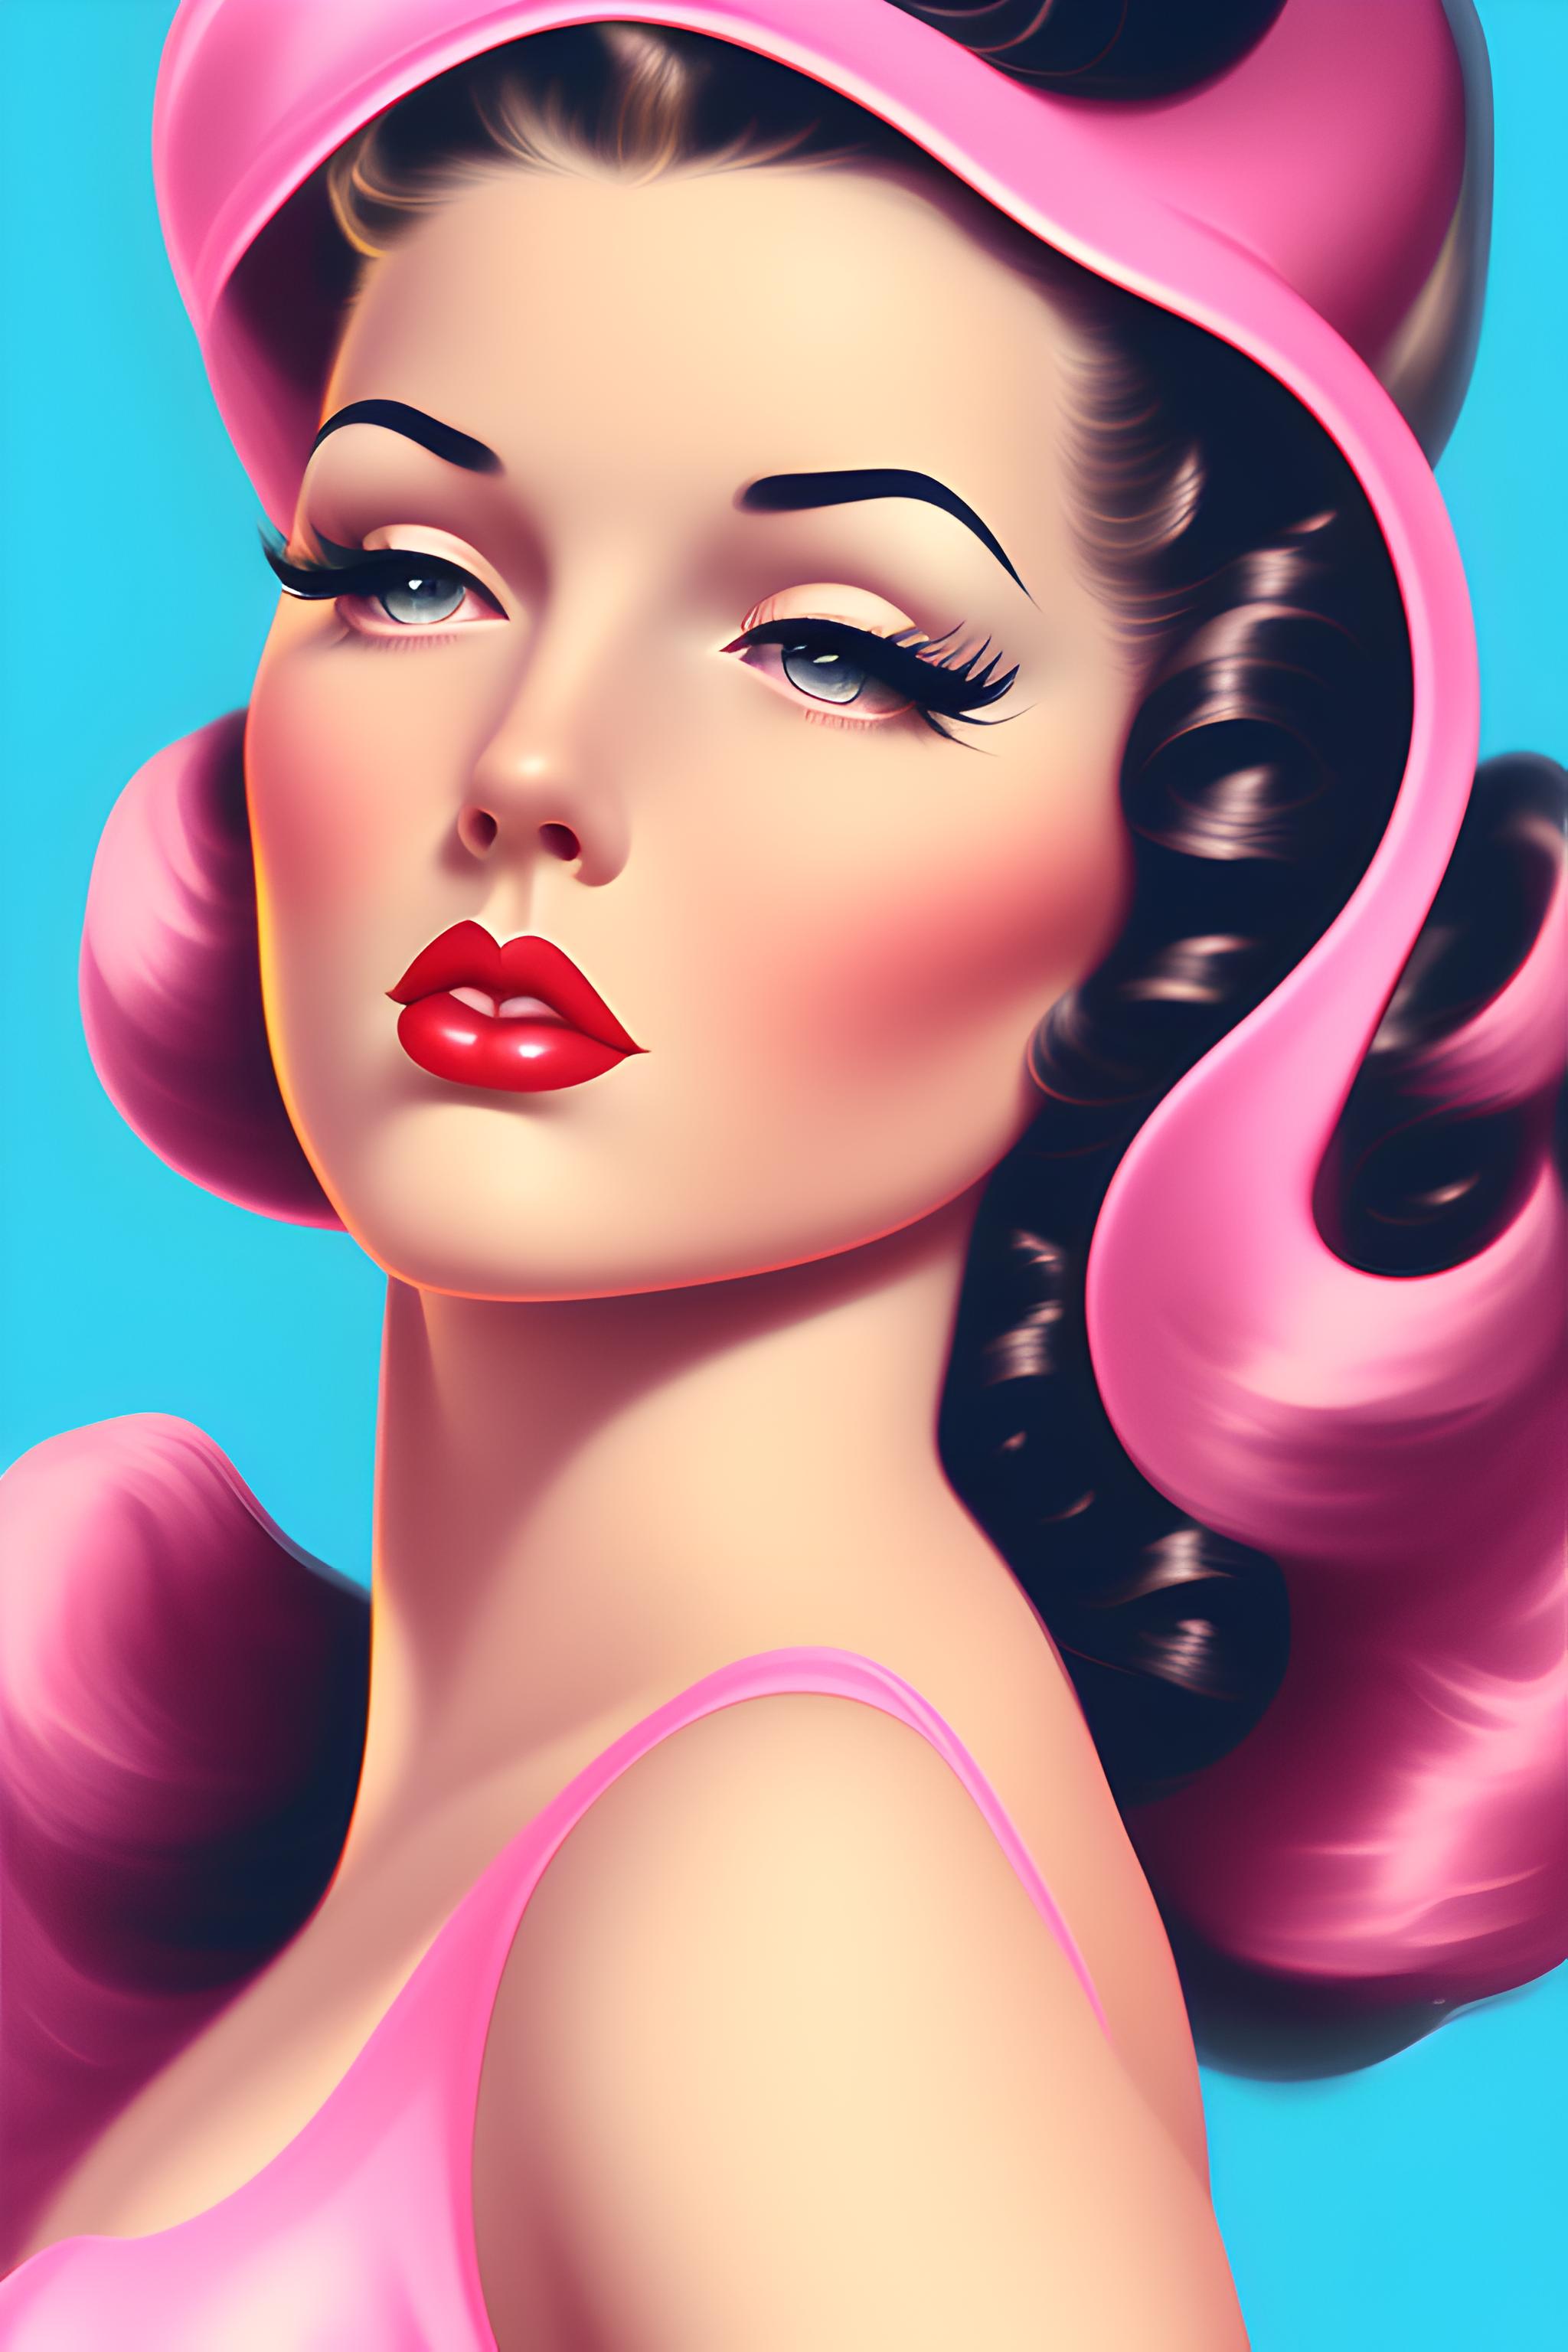 Create a pin-up girl inspired by the classic style of the 1940s and 1950s.  Make